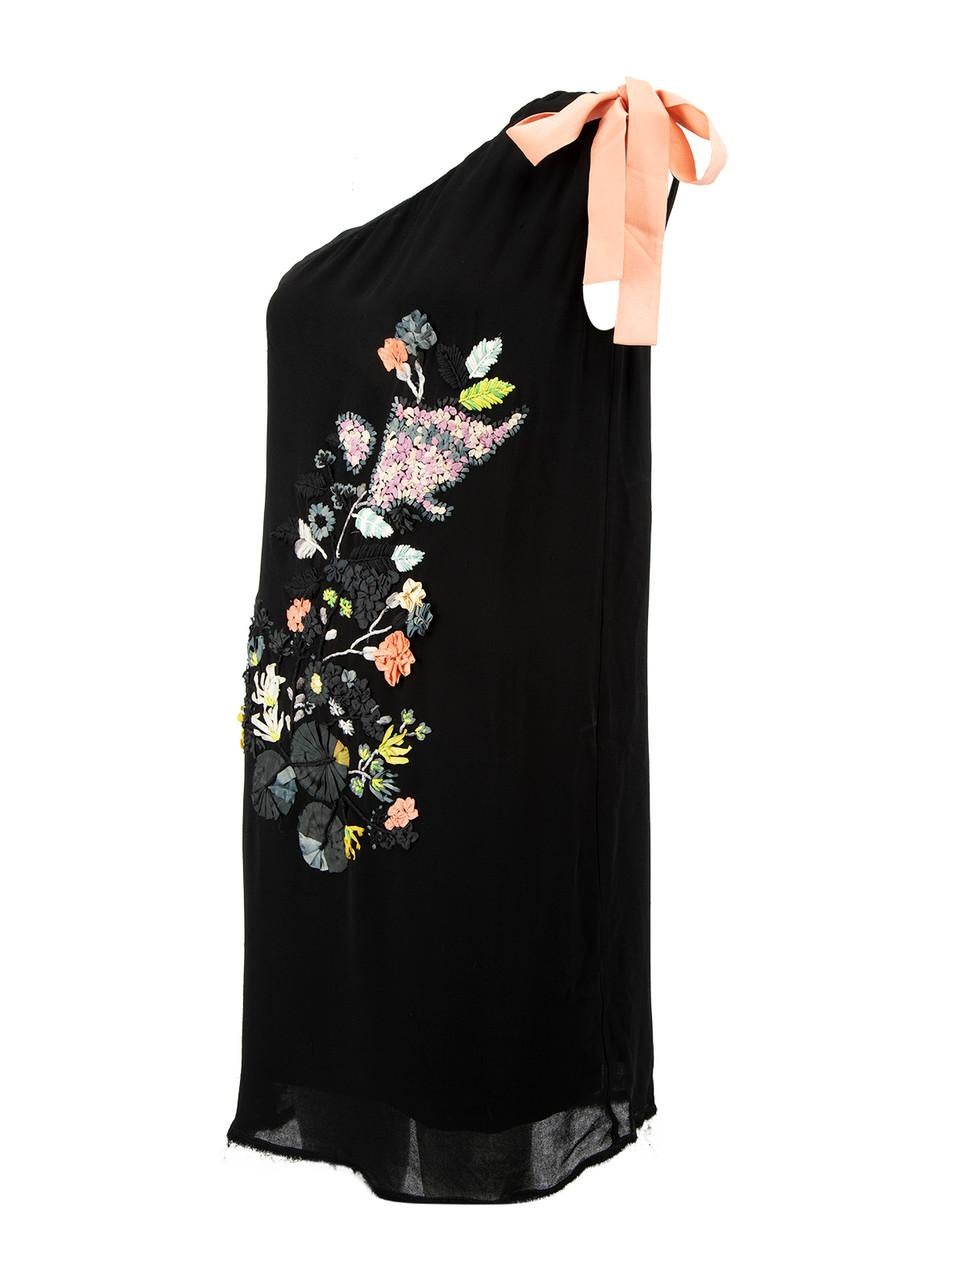 Fendi Black One Shoulder Floral Embroidery Dress Size M In Excellent Condition For Sale In London, GB